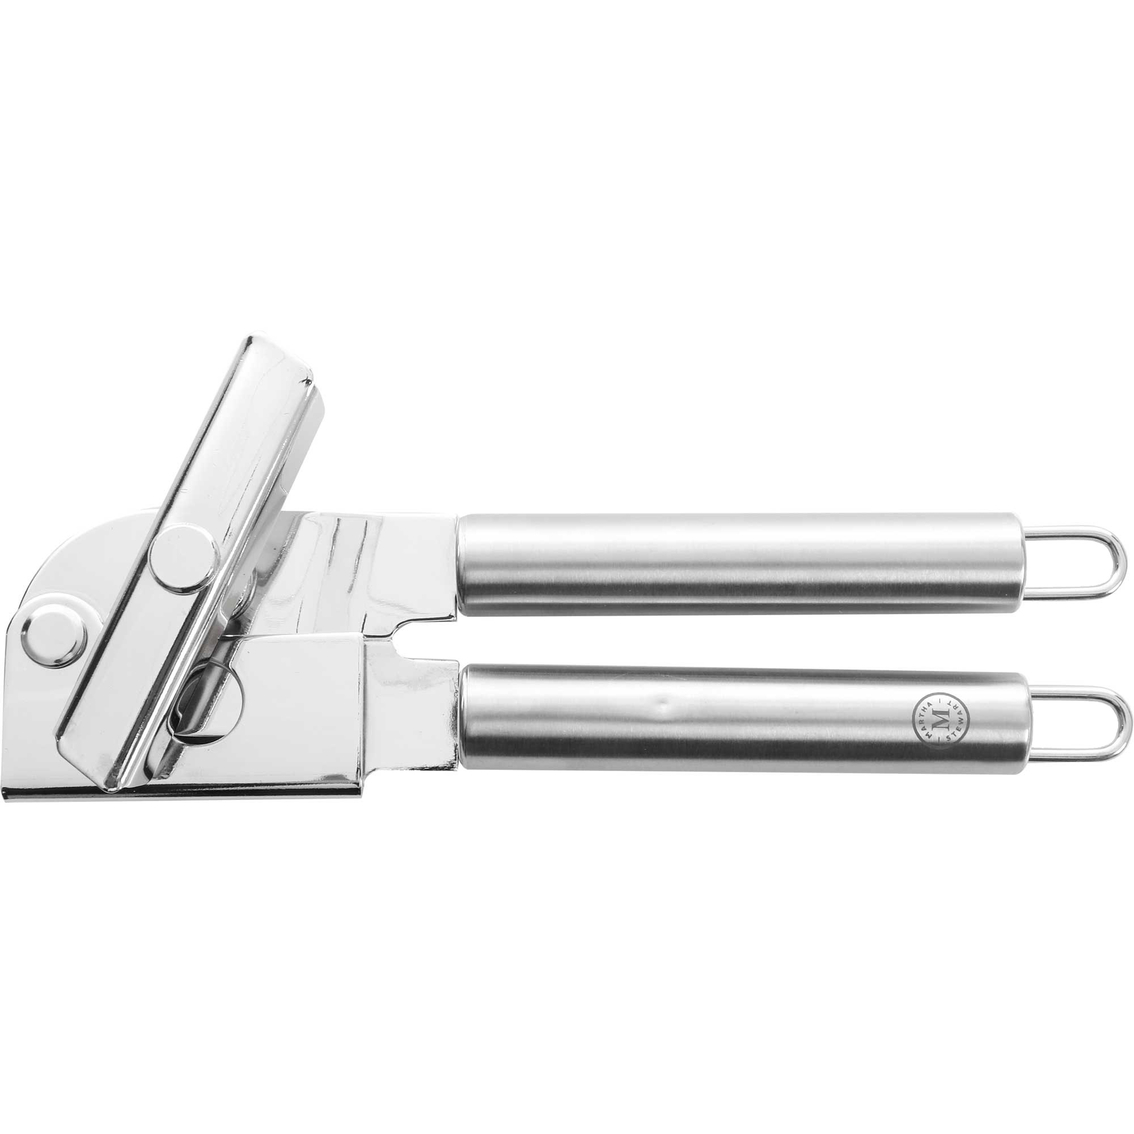 Martha Stewart Collection Hollow Handle Stainless Steel Can Opener, Cooking Tools, Household